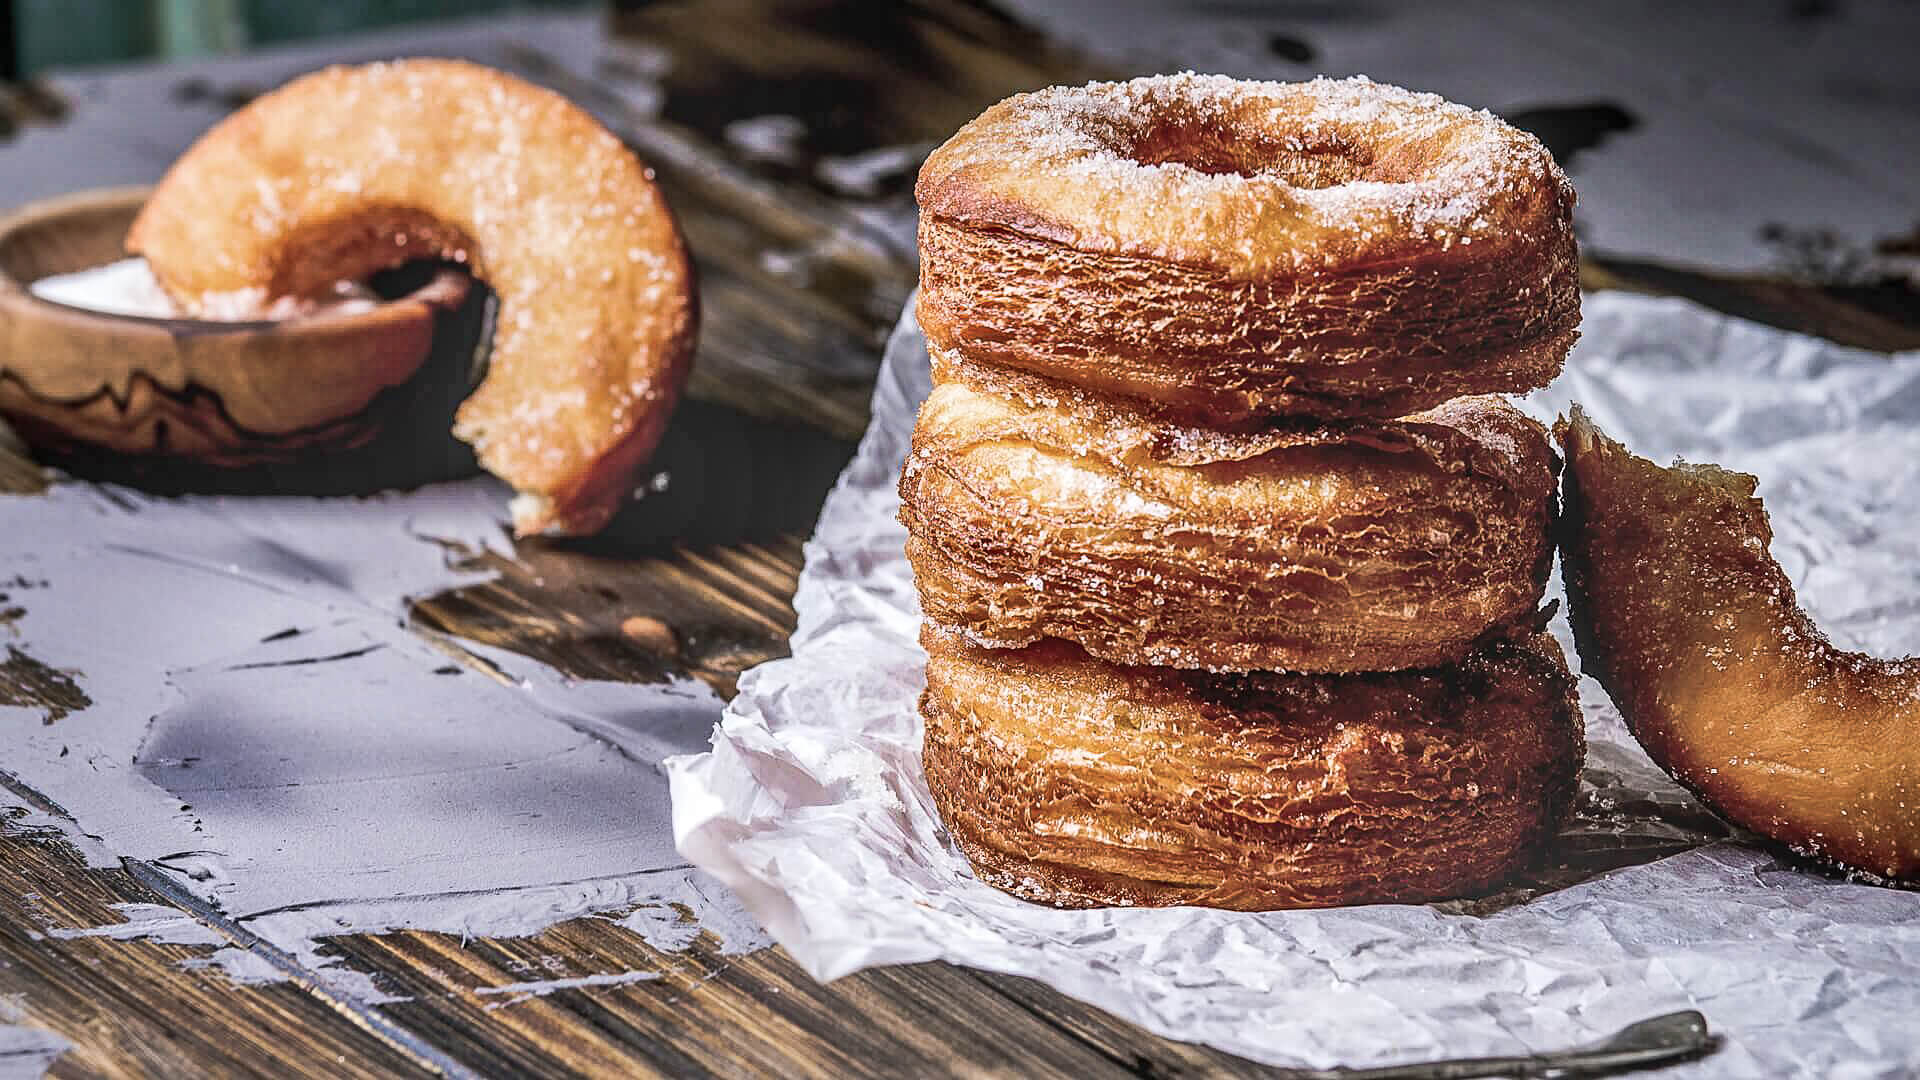 Hybrid food: Cronuts, a mixture of croissant and donut